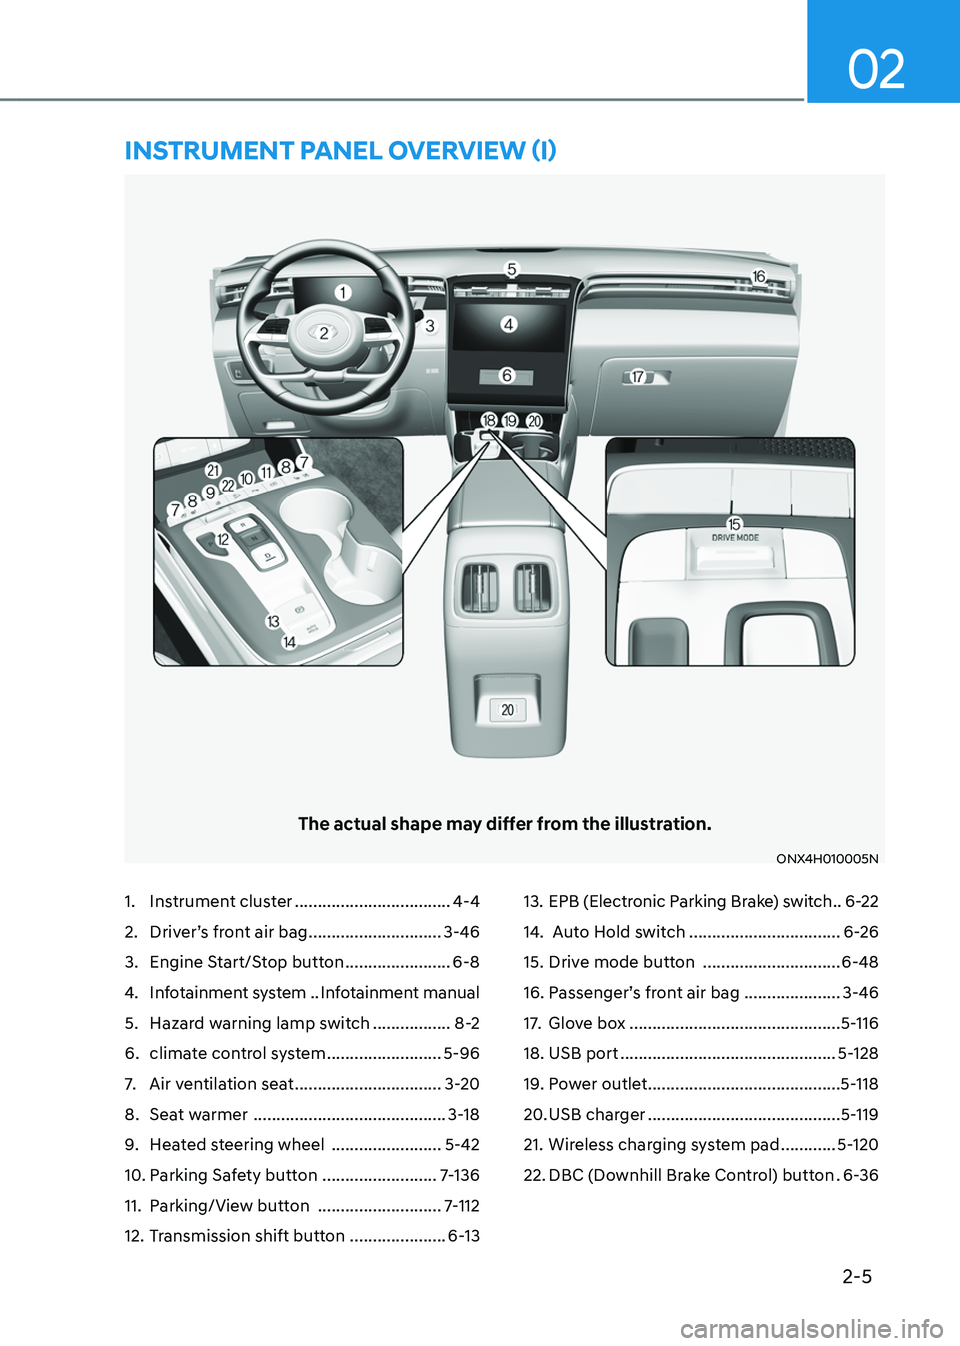 HYUNDAI TUCSON HYBRID 2021  Owners Manual 2-5
02
1. Instrument cluster ..................................4-4
2. Driver’s front air bag .............................3-46
3. Engine Start/Stop button .......................6-8
4. Infotainment 